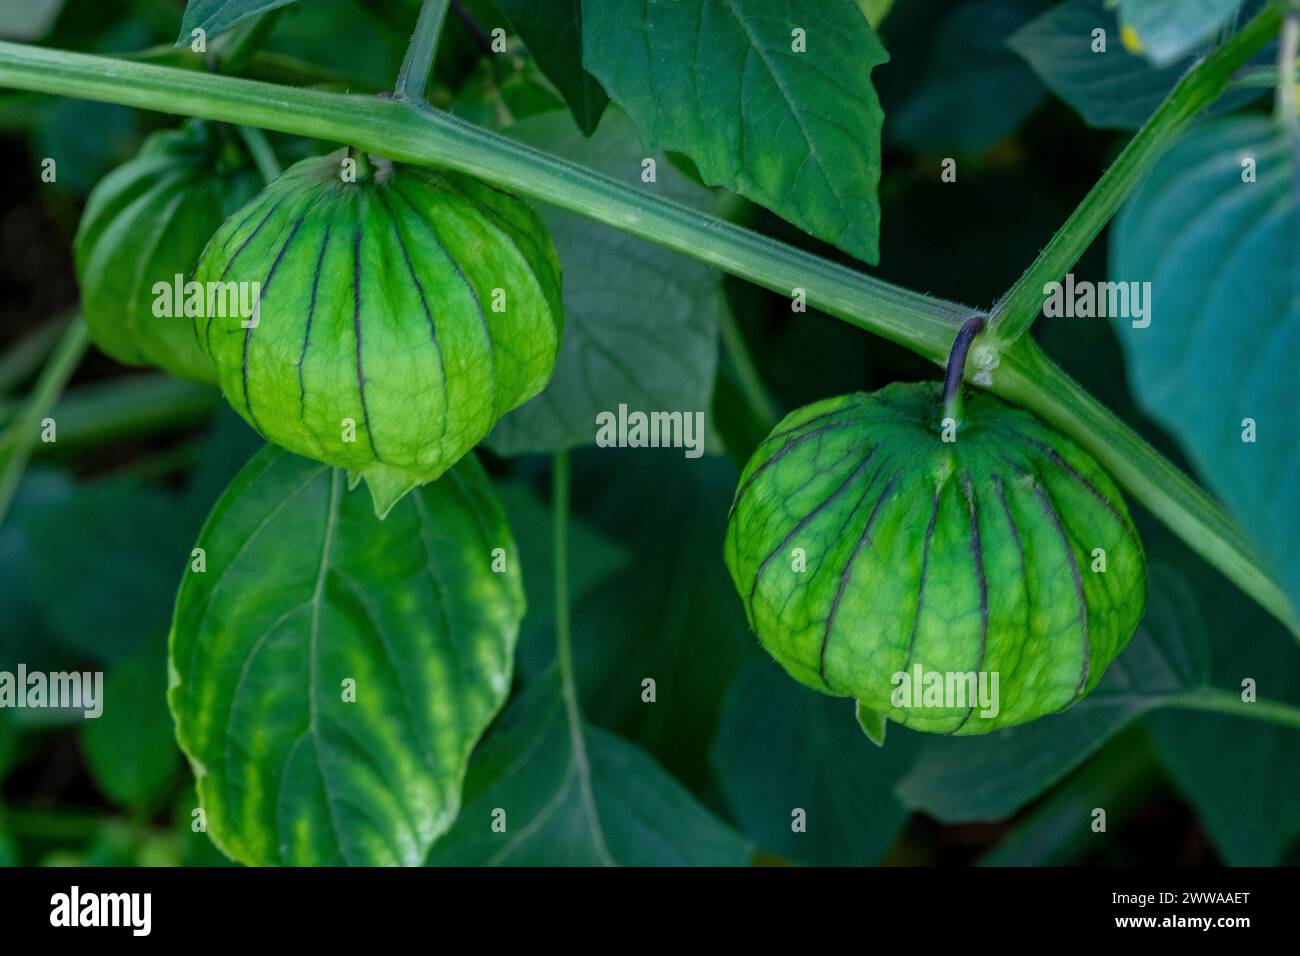 Ripening tomatillos, also known as Mexican husk tomatoes. Stock Photo